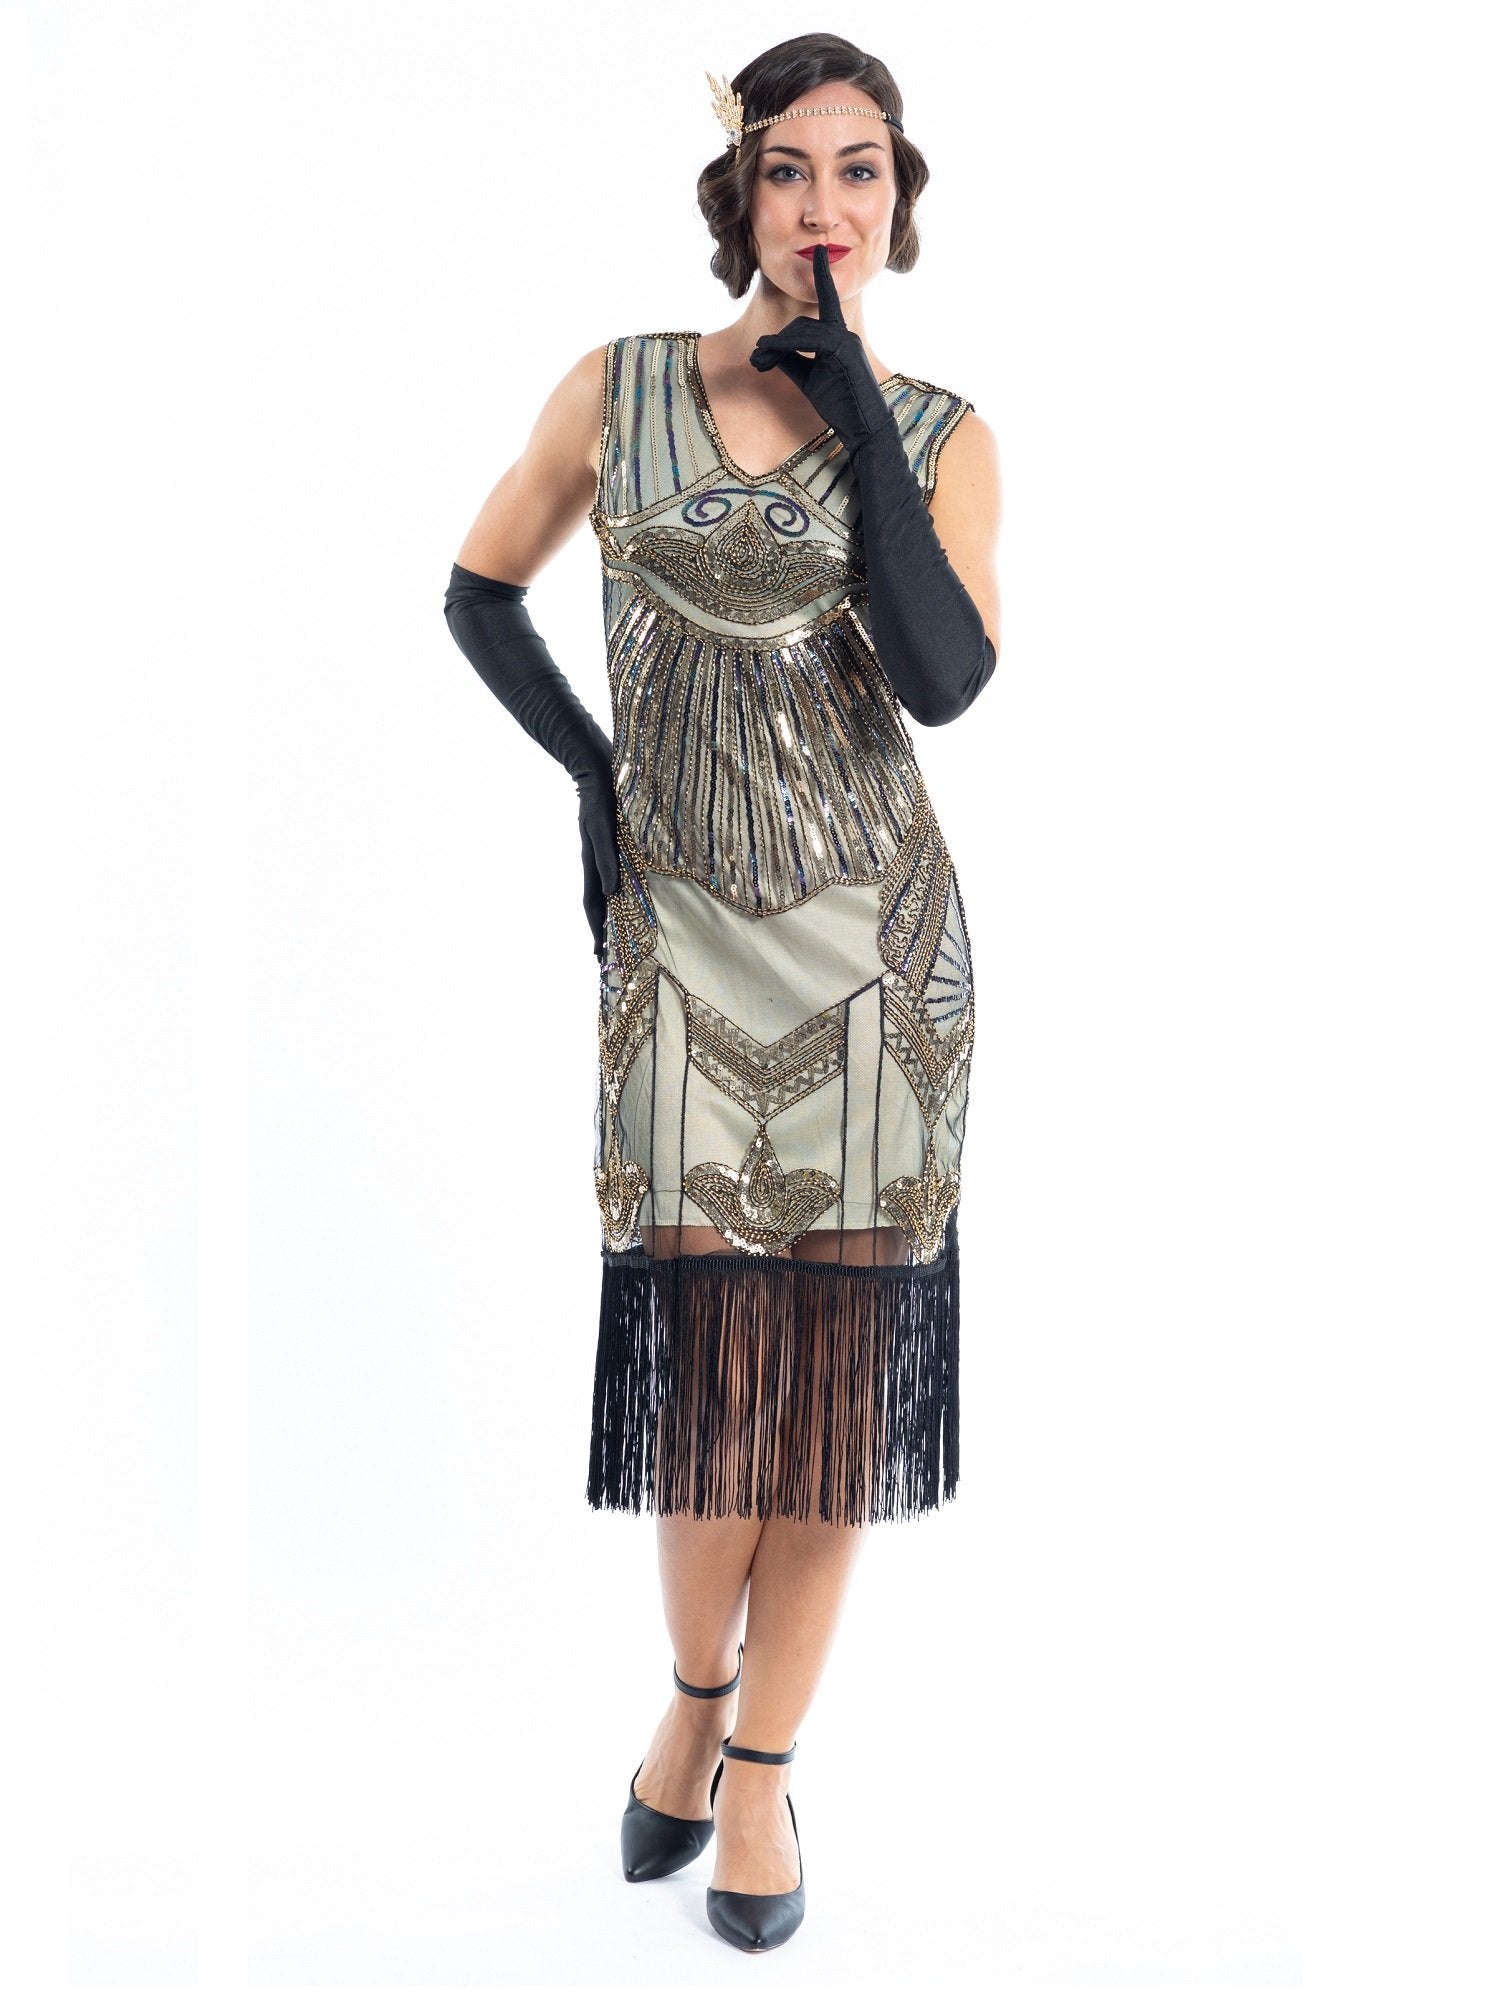 A gold flapper dress with a 1920s deco pattern of sequins, beads and fringes around the hem